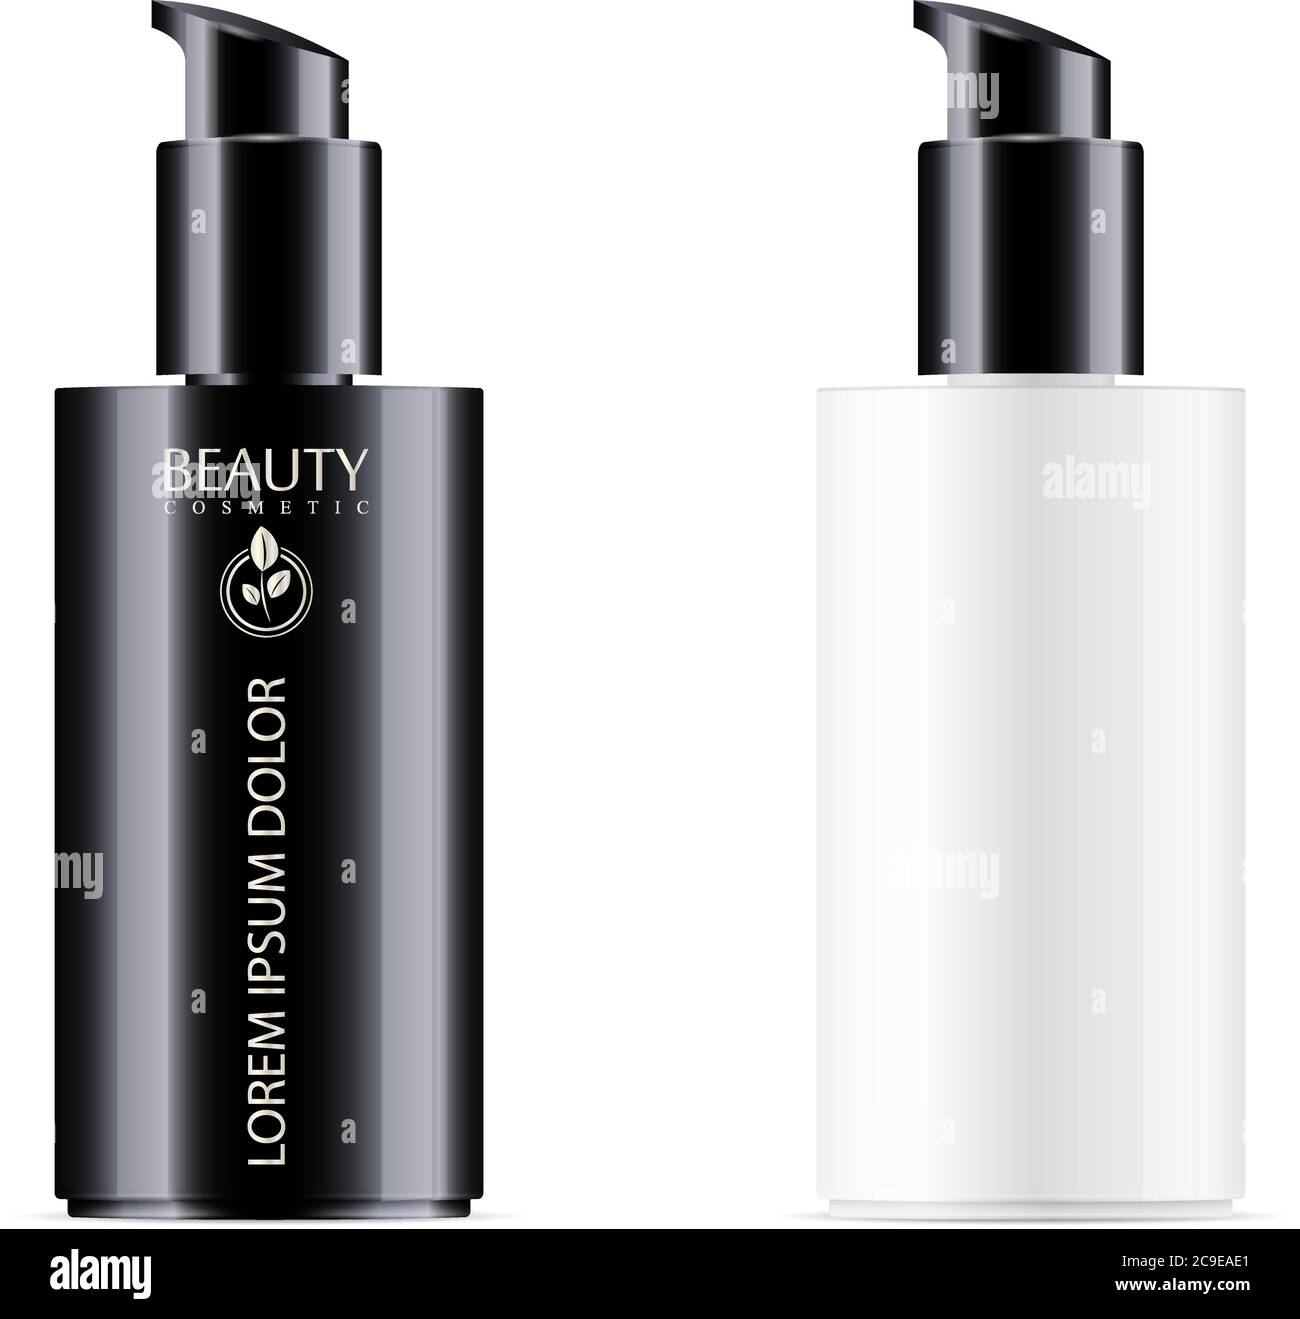 Download Black And White Cosmetic Bottle With Black Pump Dispenser Lid For Moisturizer And Facial Liquid Products Vector Design Template Cosmetics Packaging Stock Vector Image Art Alamy